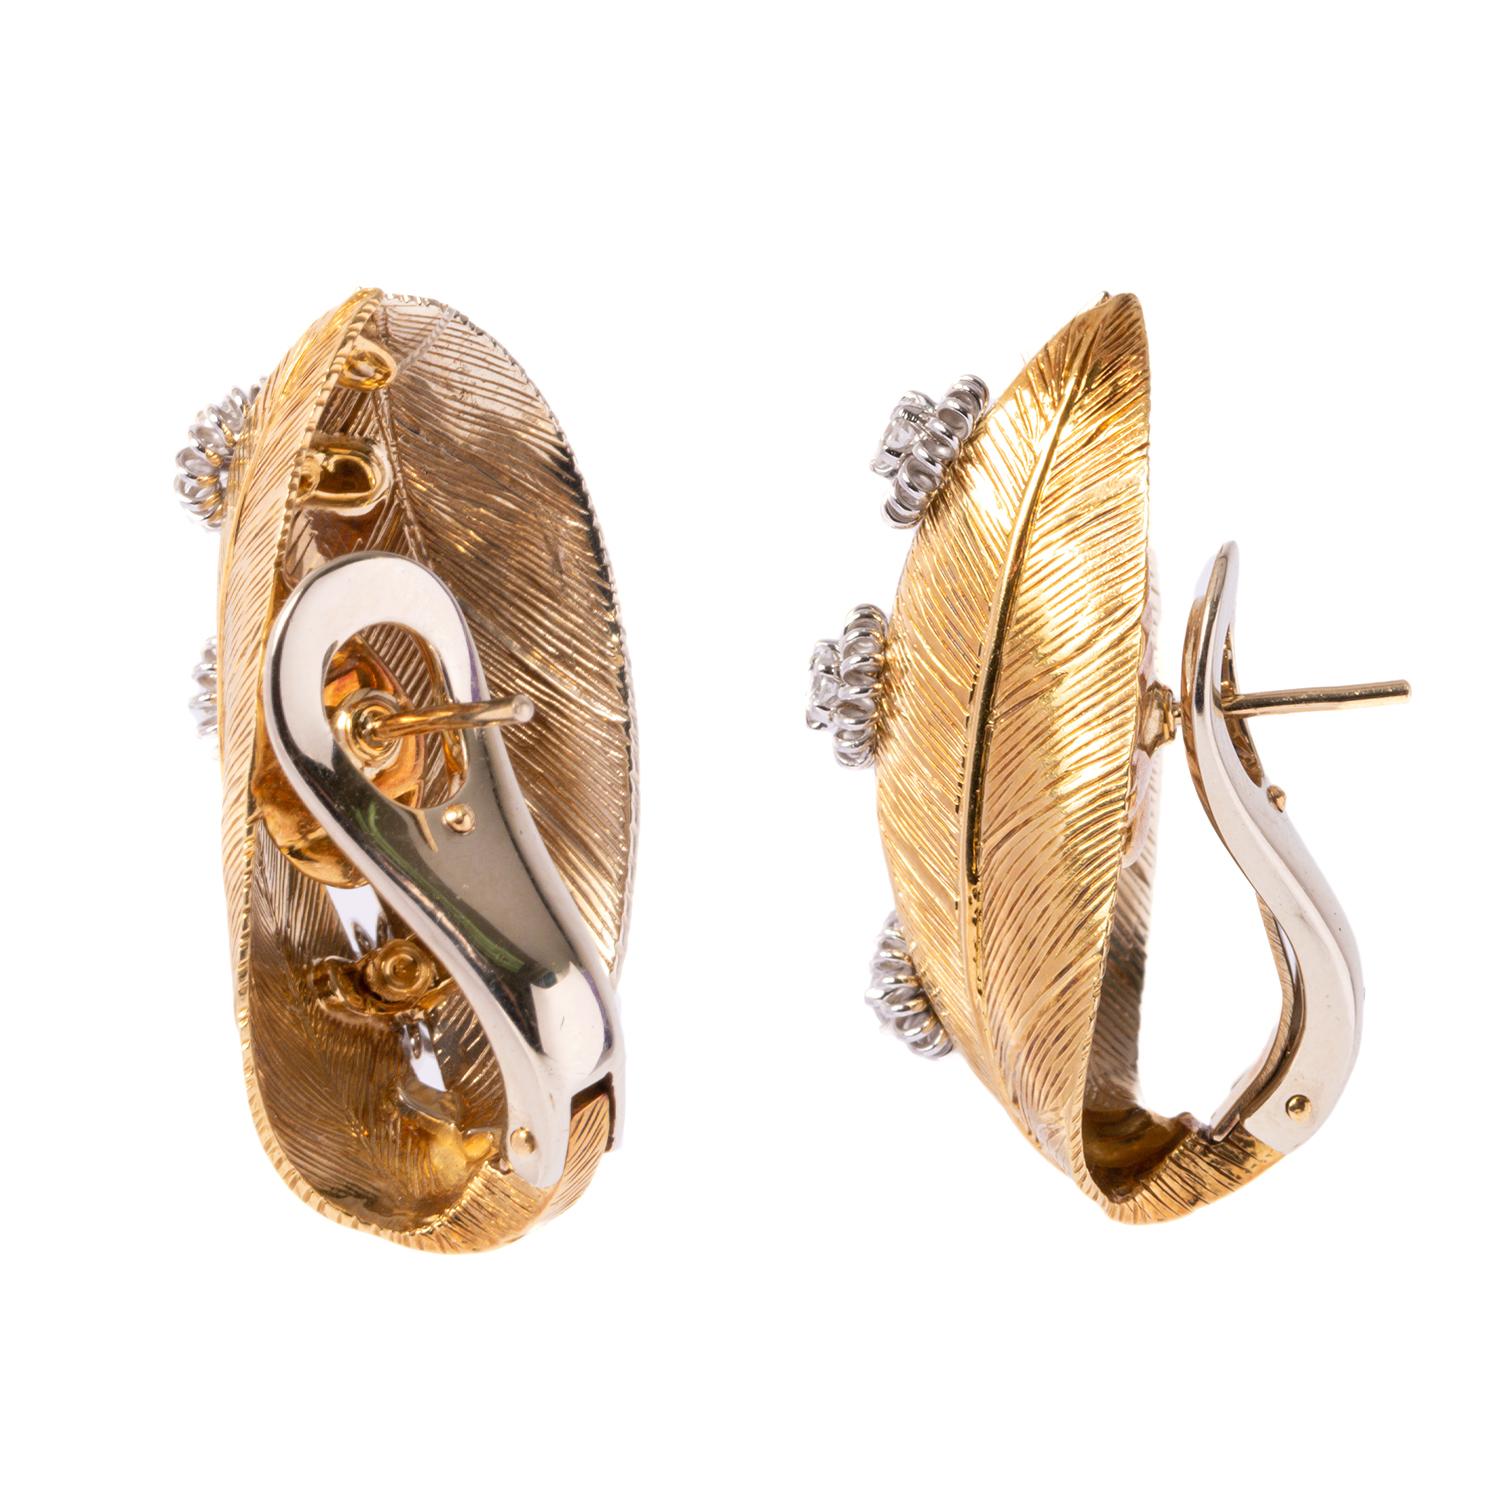 Beautiful earrings by the Italian designer Giancarlo Montebello. The earrings were designed directly for our Enrico Trizio 1868 jewelry. A very elegant pair of yellow gold earrings with leaf design and Diamond , 0.45 carats of White Diamonds.